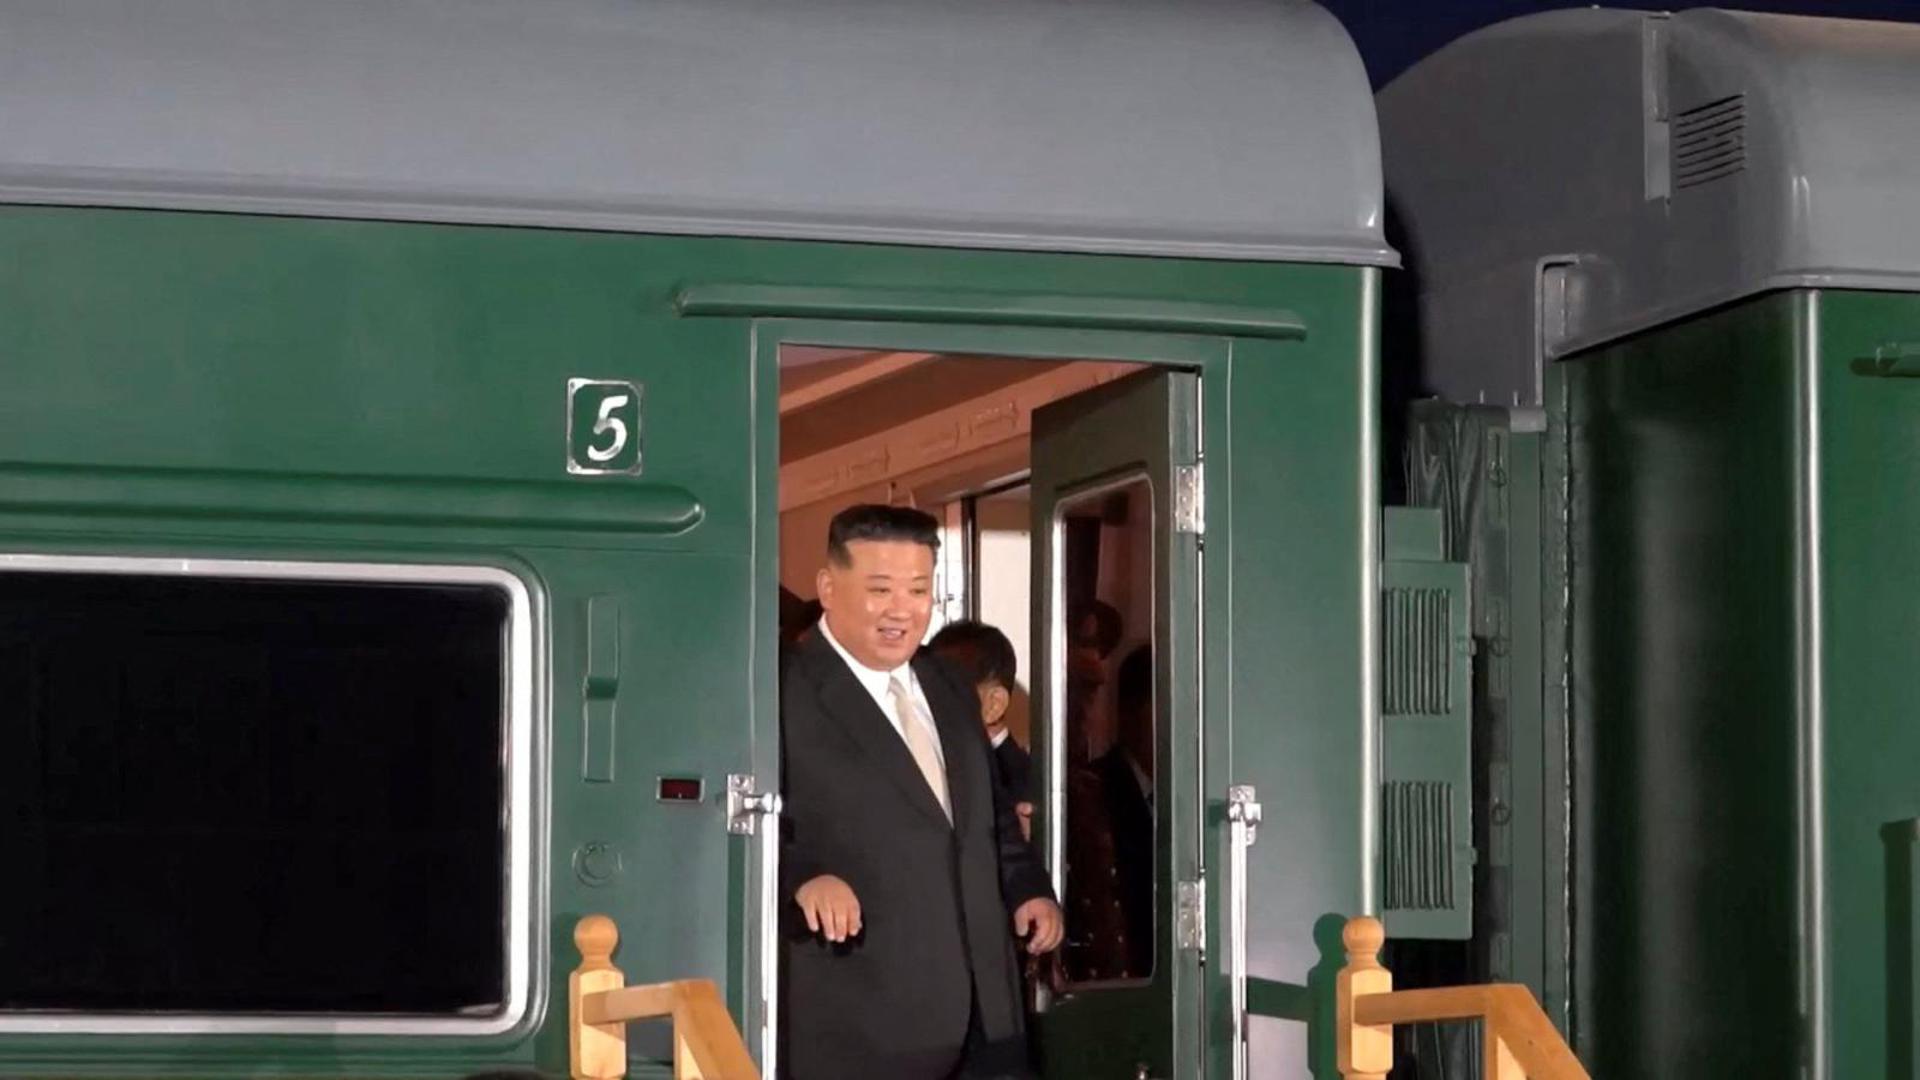 A view shows North Korean leader Kim Jong Un disembarking from his train in Russia and being greeted by Russian officials in Khasan in the Primorsky region, Russia, in this still image from video published September 12, 2023. Courtesy Governor of Russia's Primorsky Krai Oleg Kozhemyako Telegram Channel via REUTERS ATTENTION EDITORS - THIS IMAGE WAS PROVIDED BY A THIRD PARTY. NO RESALES. NO ARCHIVES. MANDATORY CREDIT. Photo: OLEG KOZHEMYAKO TELEGRAM CHANNEL/REUTERS